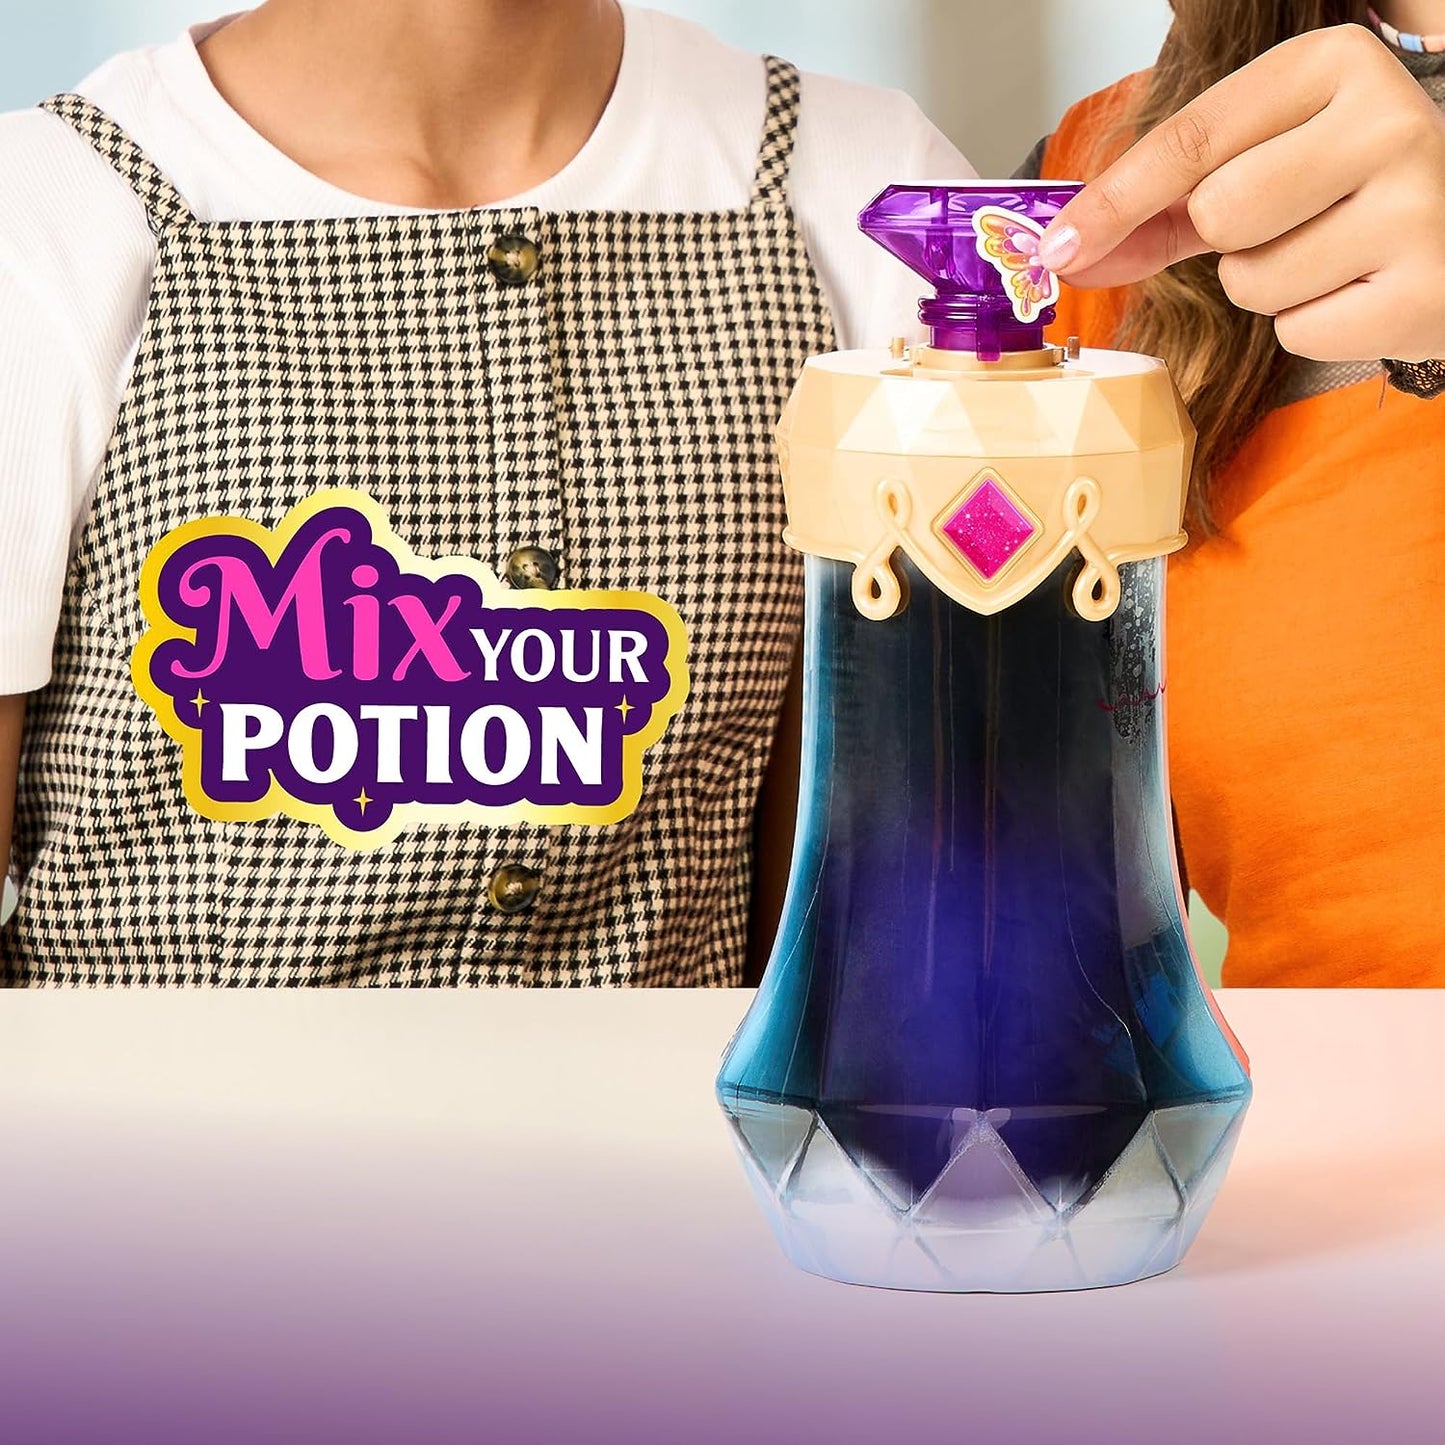 Magic Mixies Pixlings. Deerlee The Deer Pixling. Create and Mix A Magic Potion That Magically Reveals A Beautiful 6.5" Pixling Doll Inside A Potion Bottle!